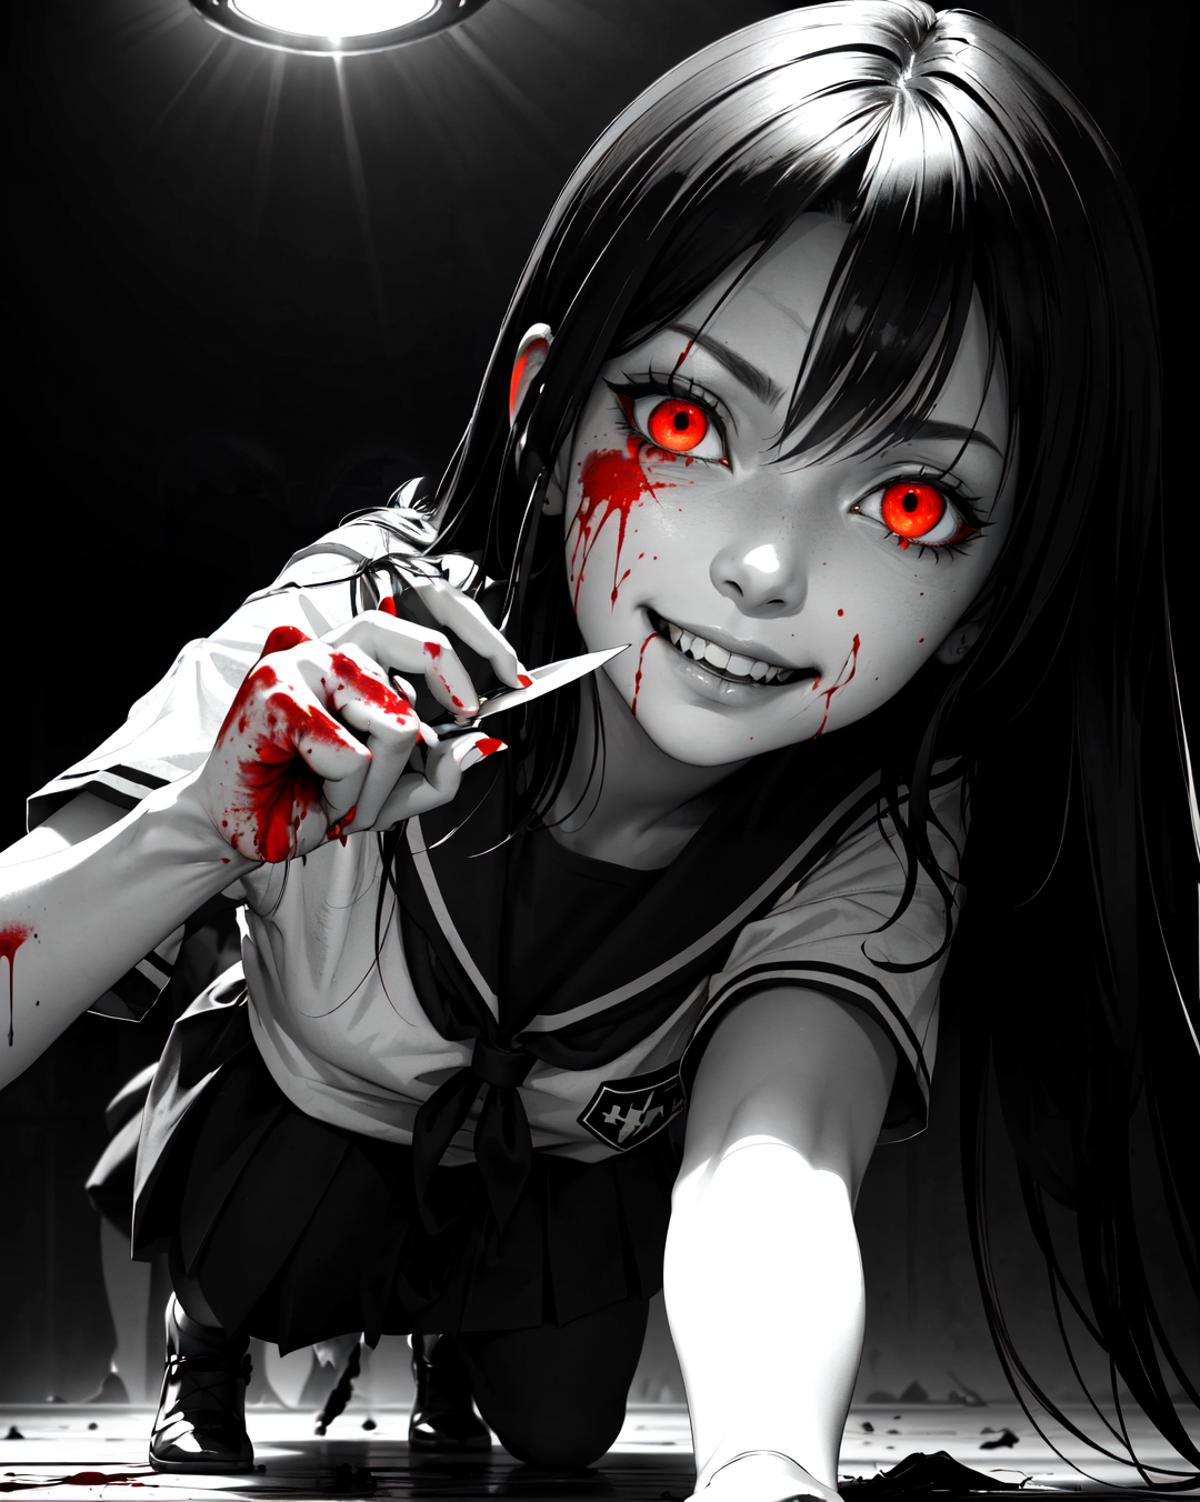 Anime girl with red eyes and blood on her hands and face.